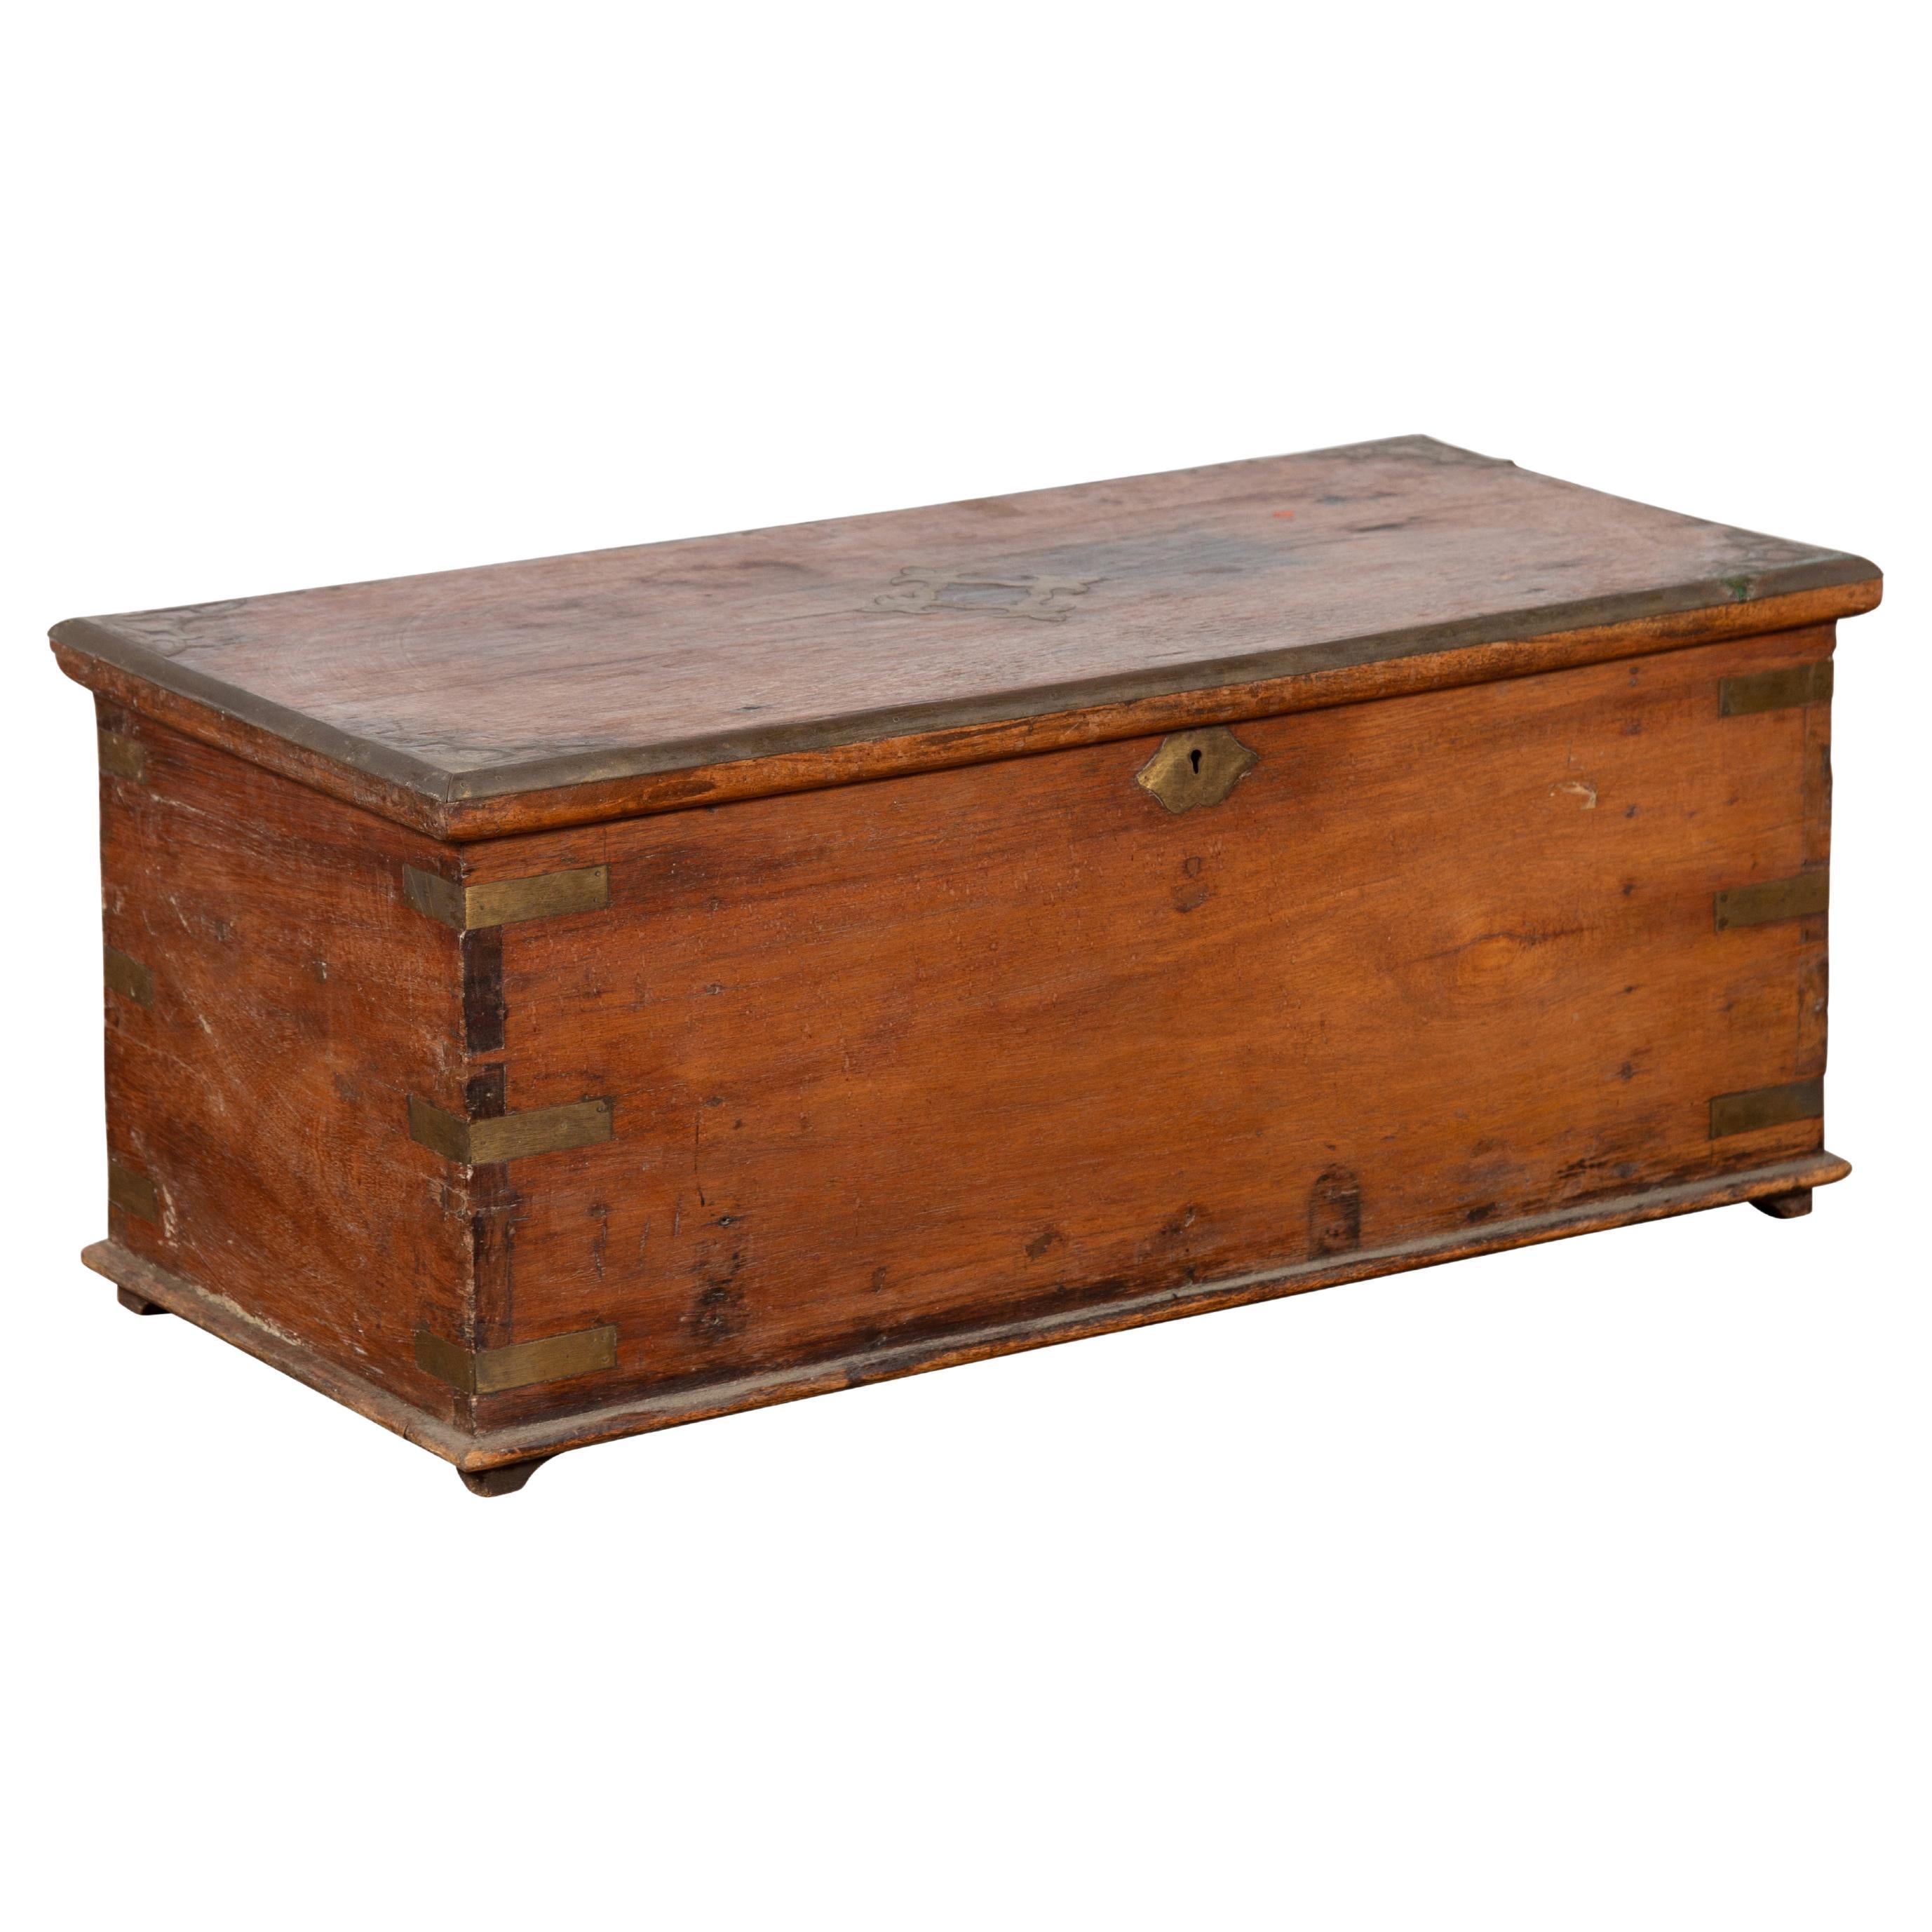 19th Century Indian Wooden Blanket Chest Trunk with Brass Inlay